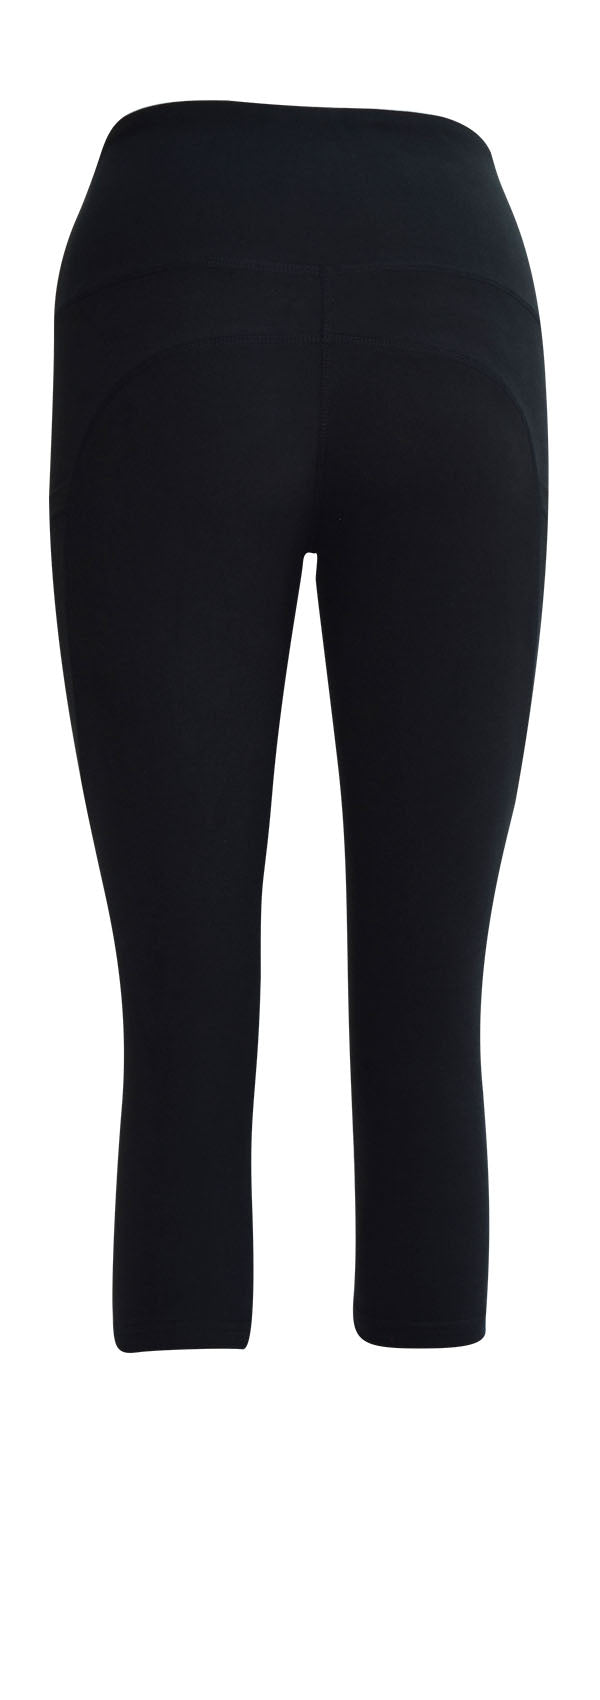 MINARIE Womens Flare Leggings with Pockets - Premium Quality Made